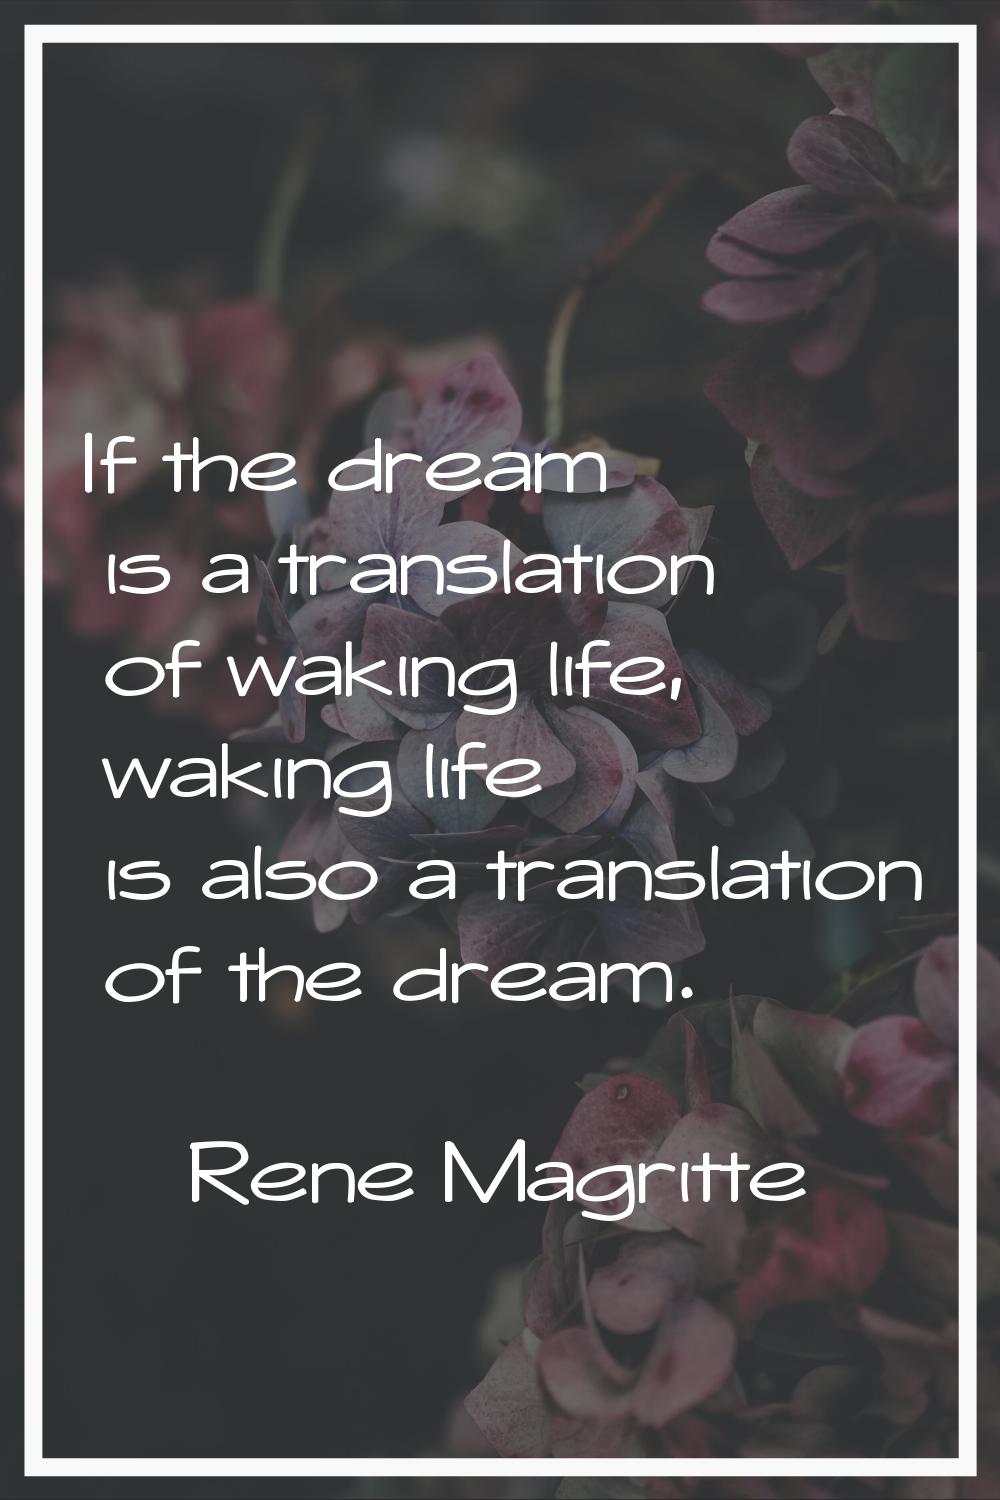 If the dream is a translation of waking life, waking life is also a translation of the dream.